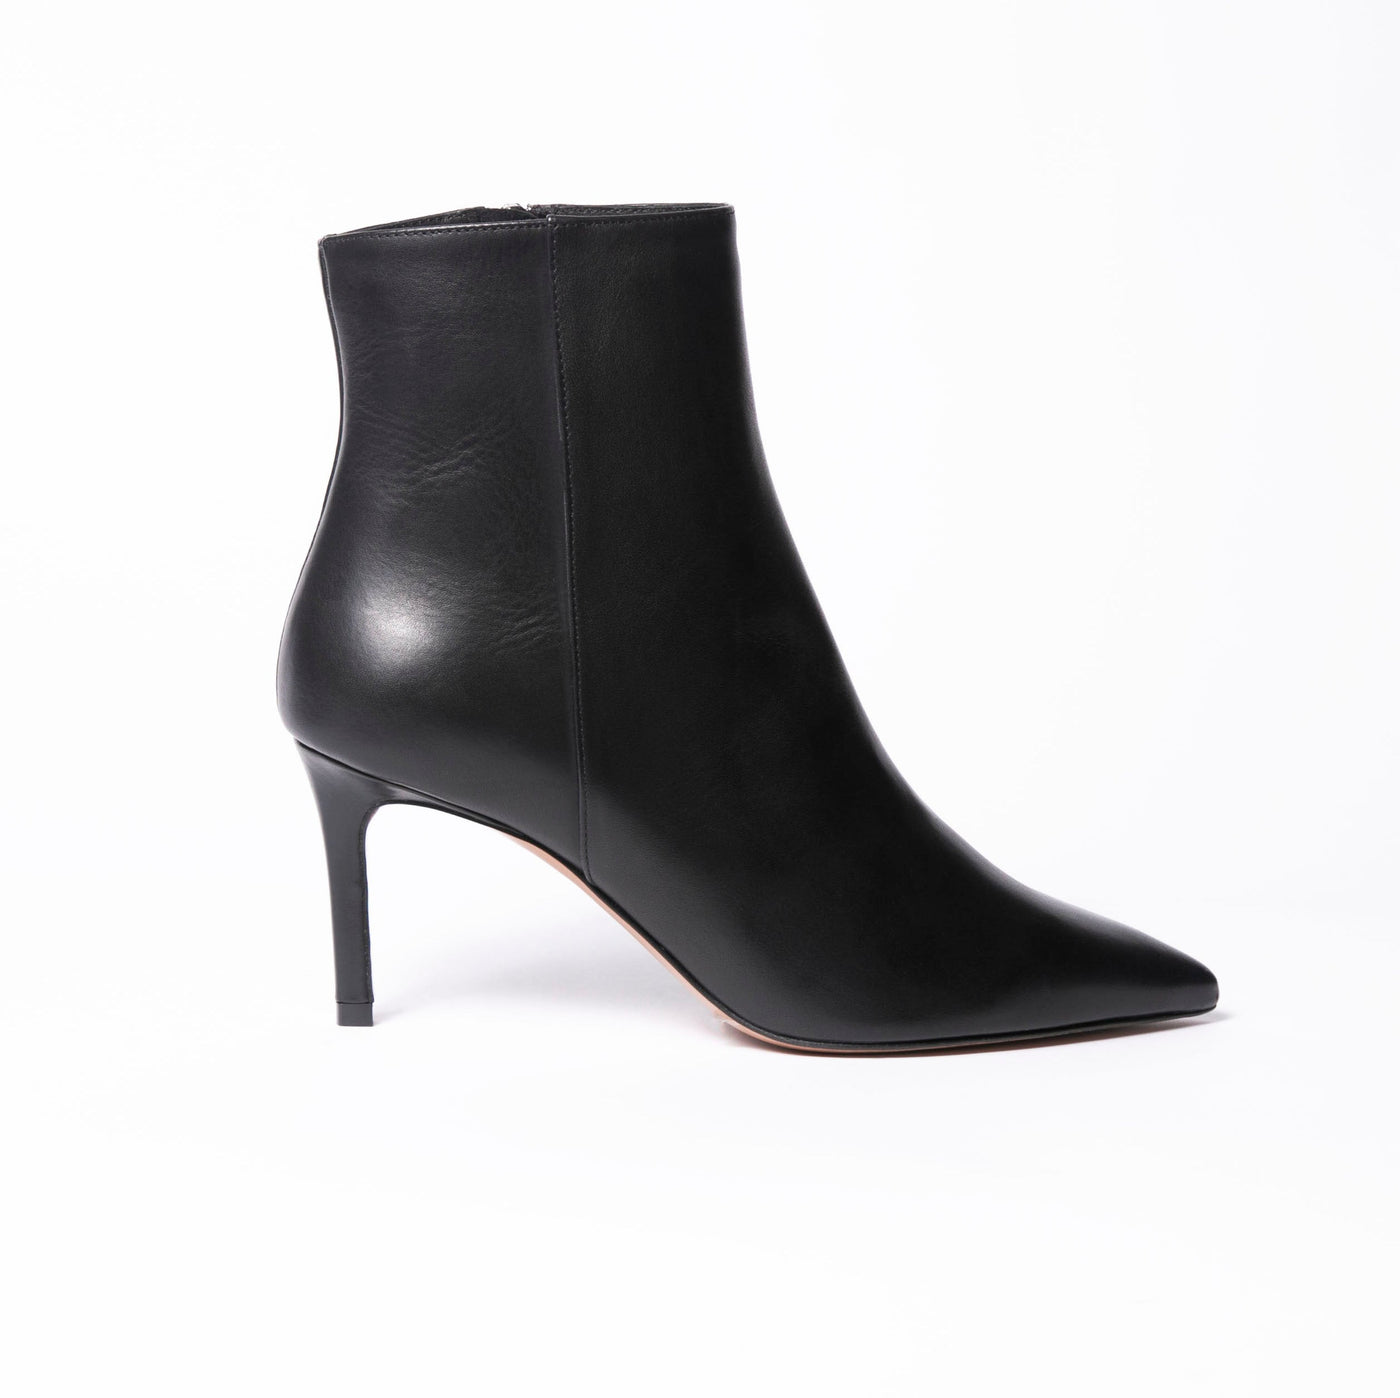 Black leather stiletto ankle boot. 